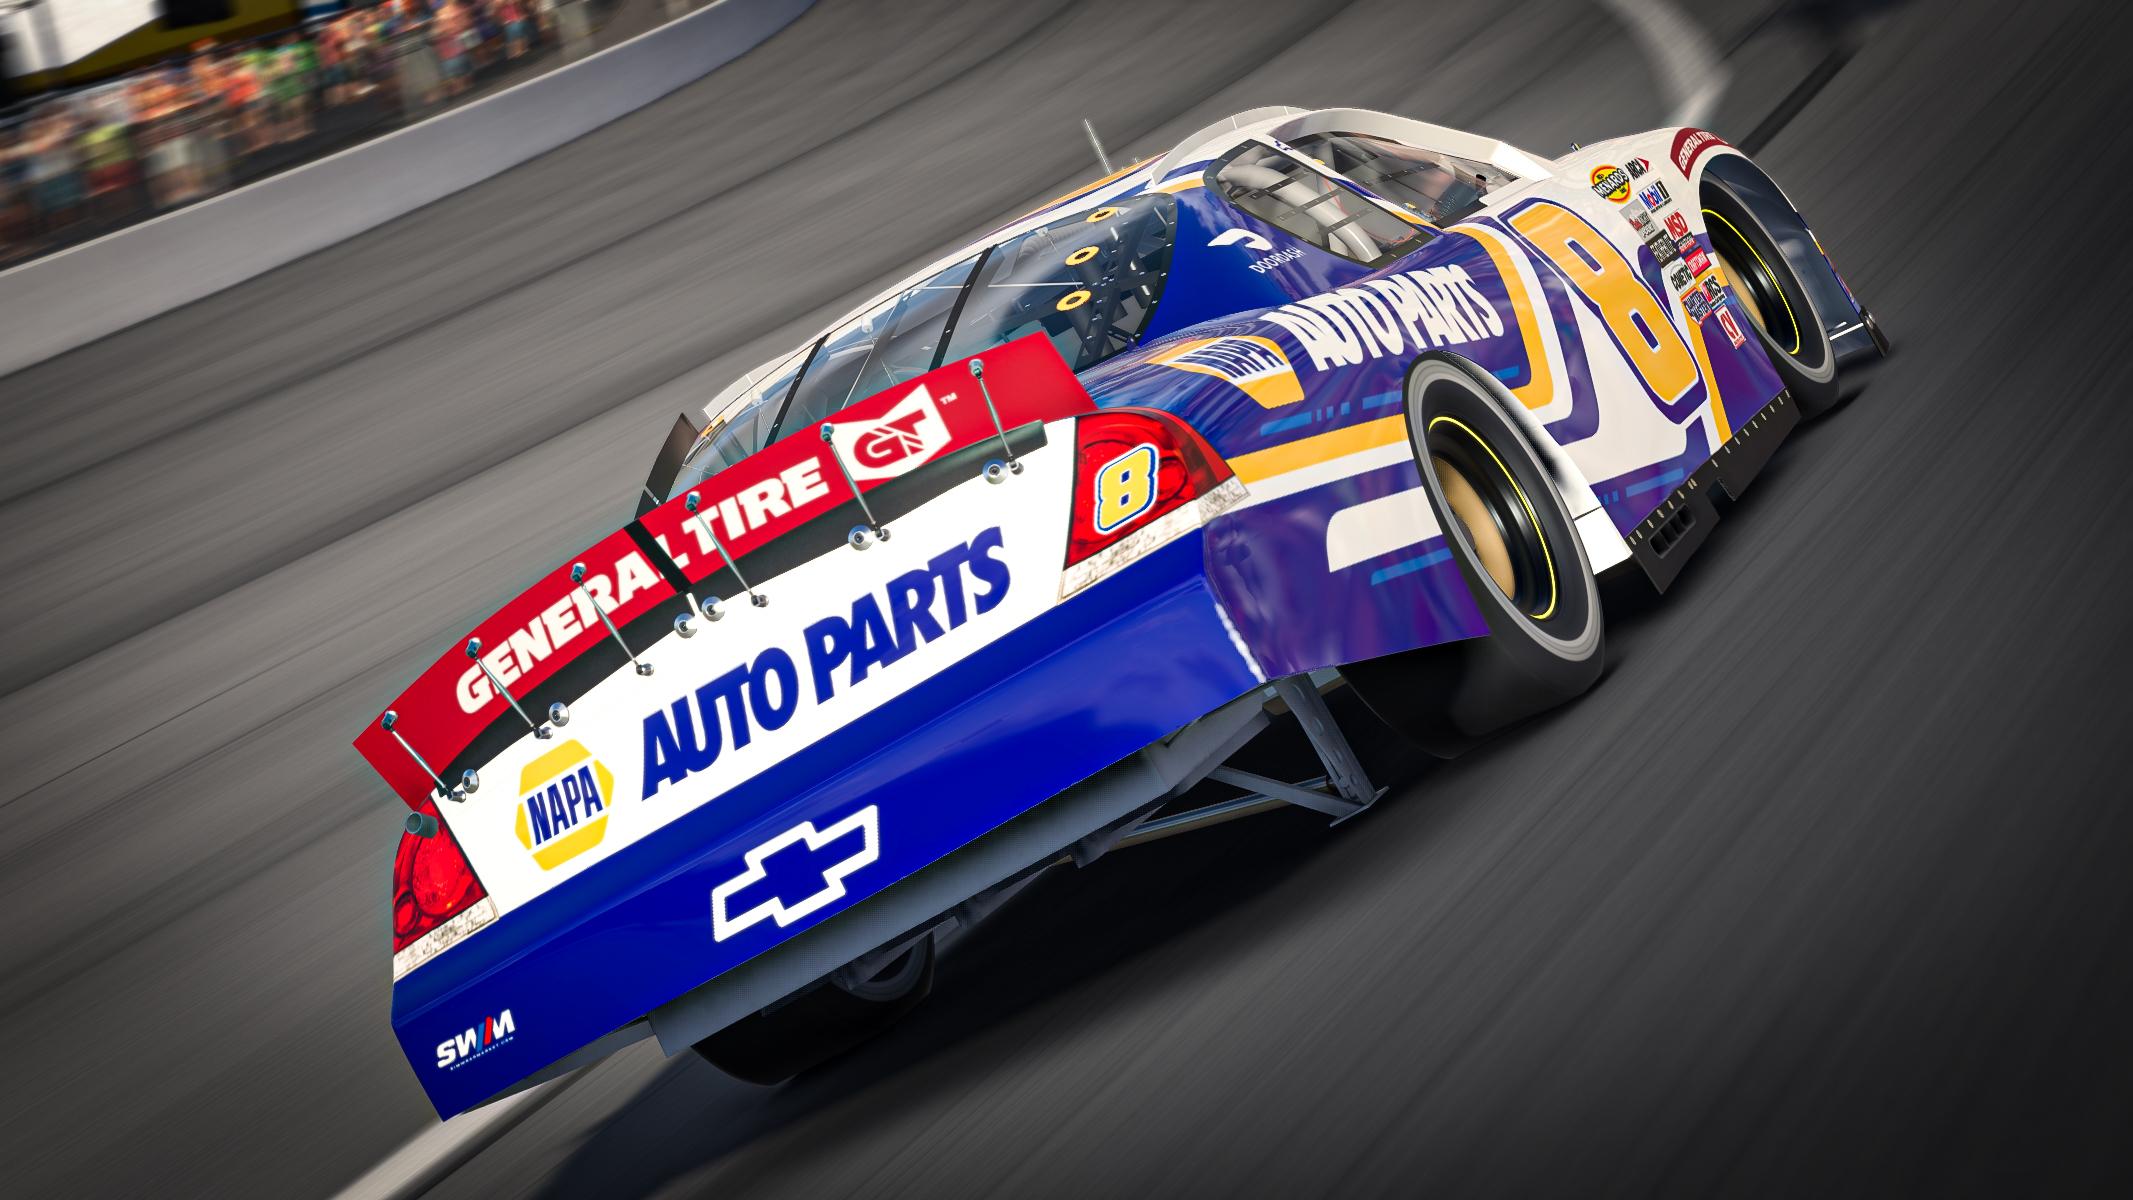 Preview of Napa Auto Parts Impala SS by Justin T Wilkinson